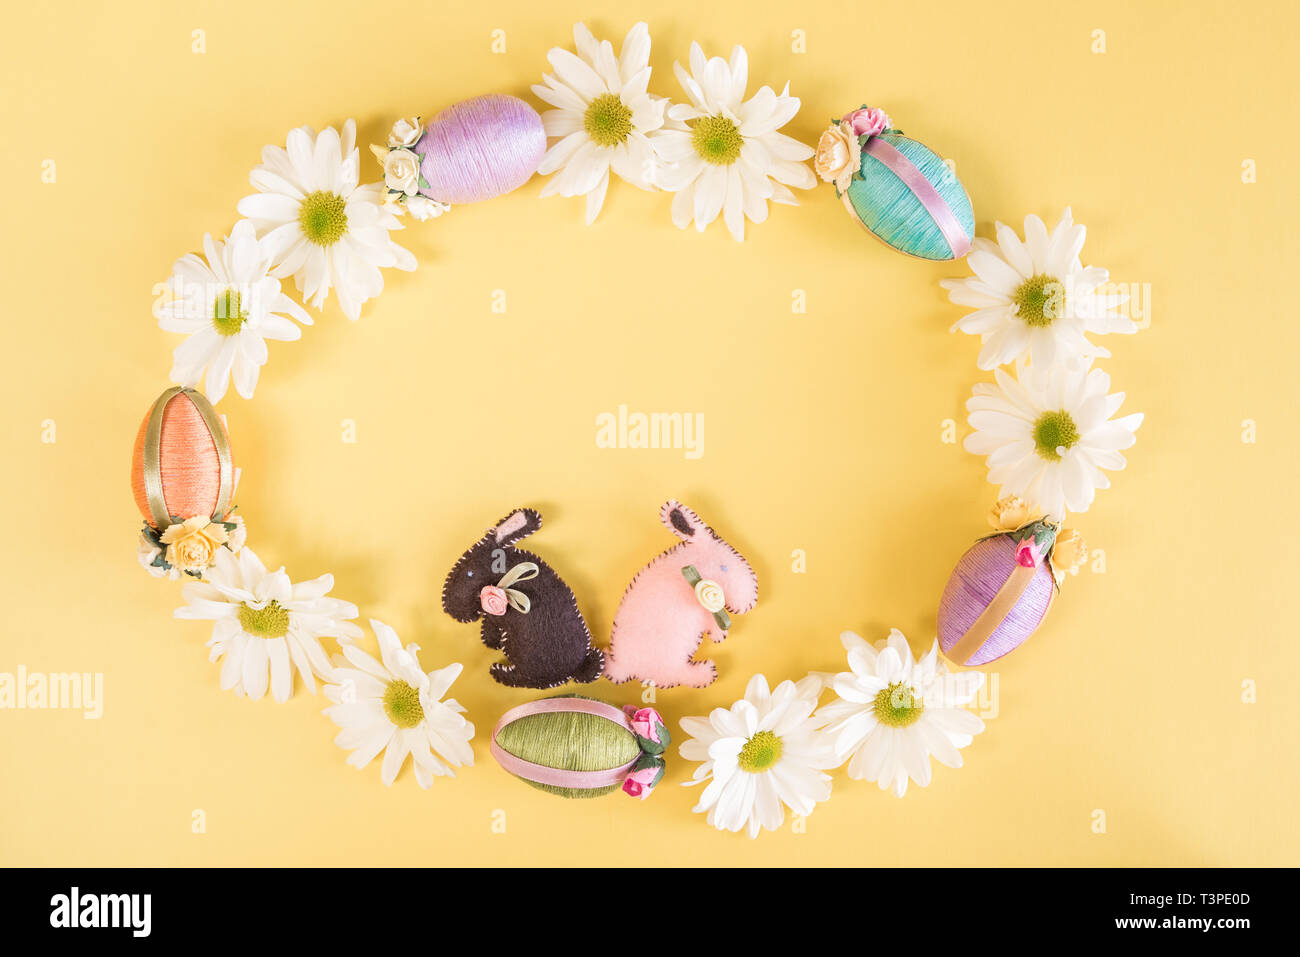 Wreath of daisies, Easter eggs, and Easter bunnies on solid pastel yellow background Stock Photo